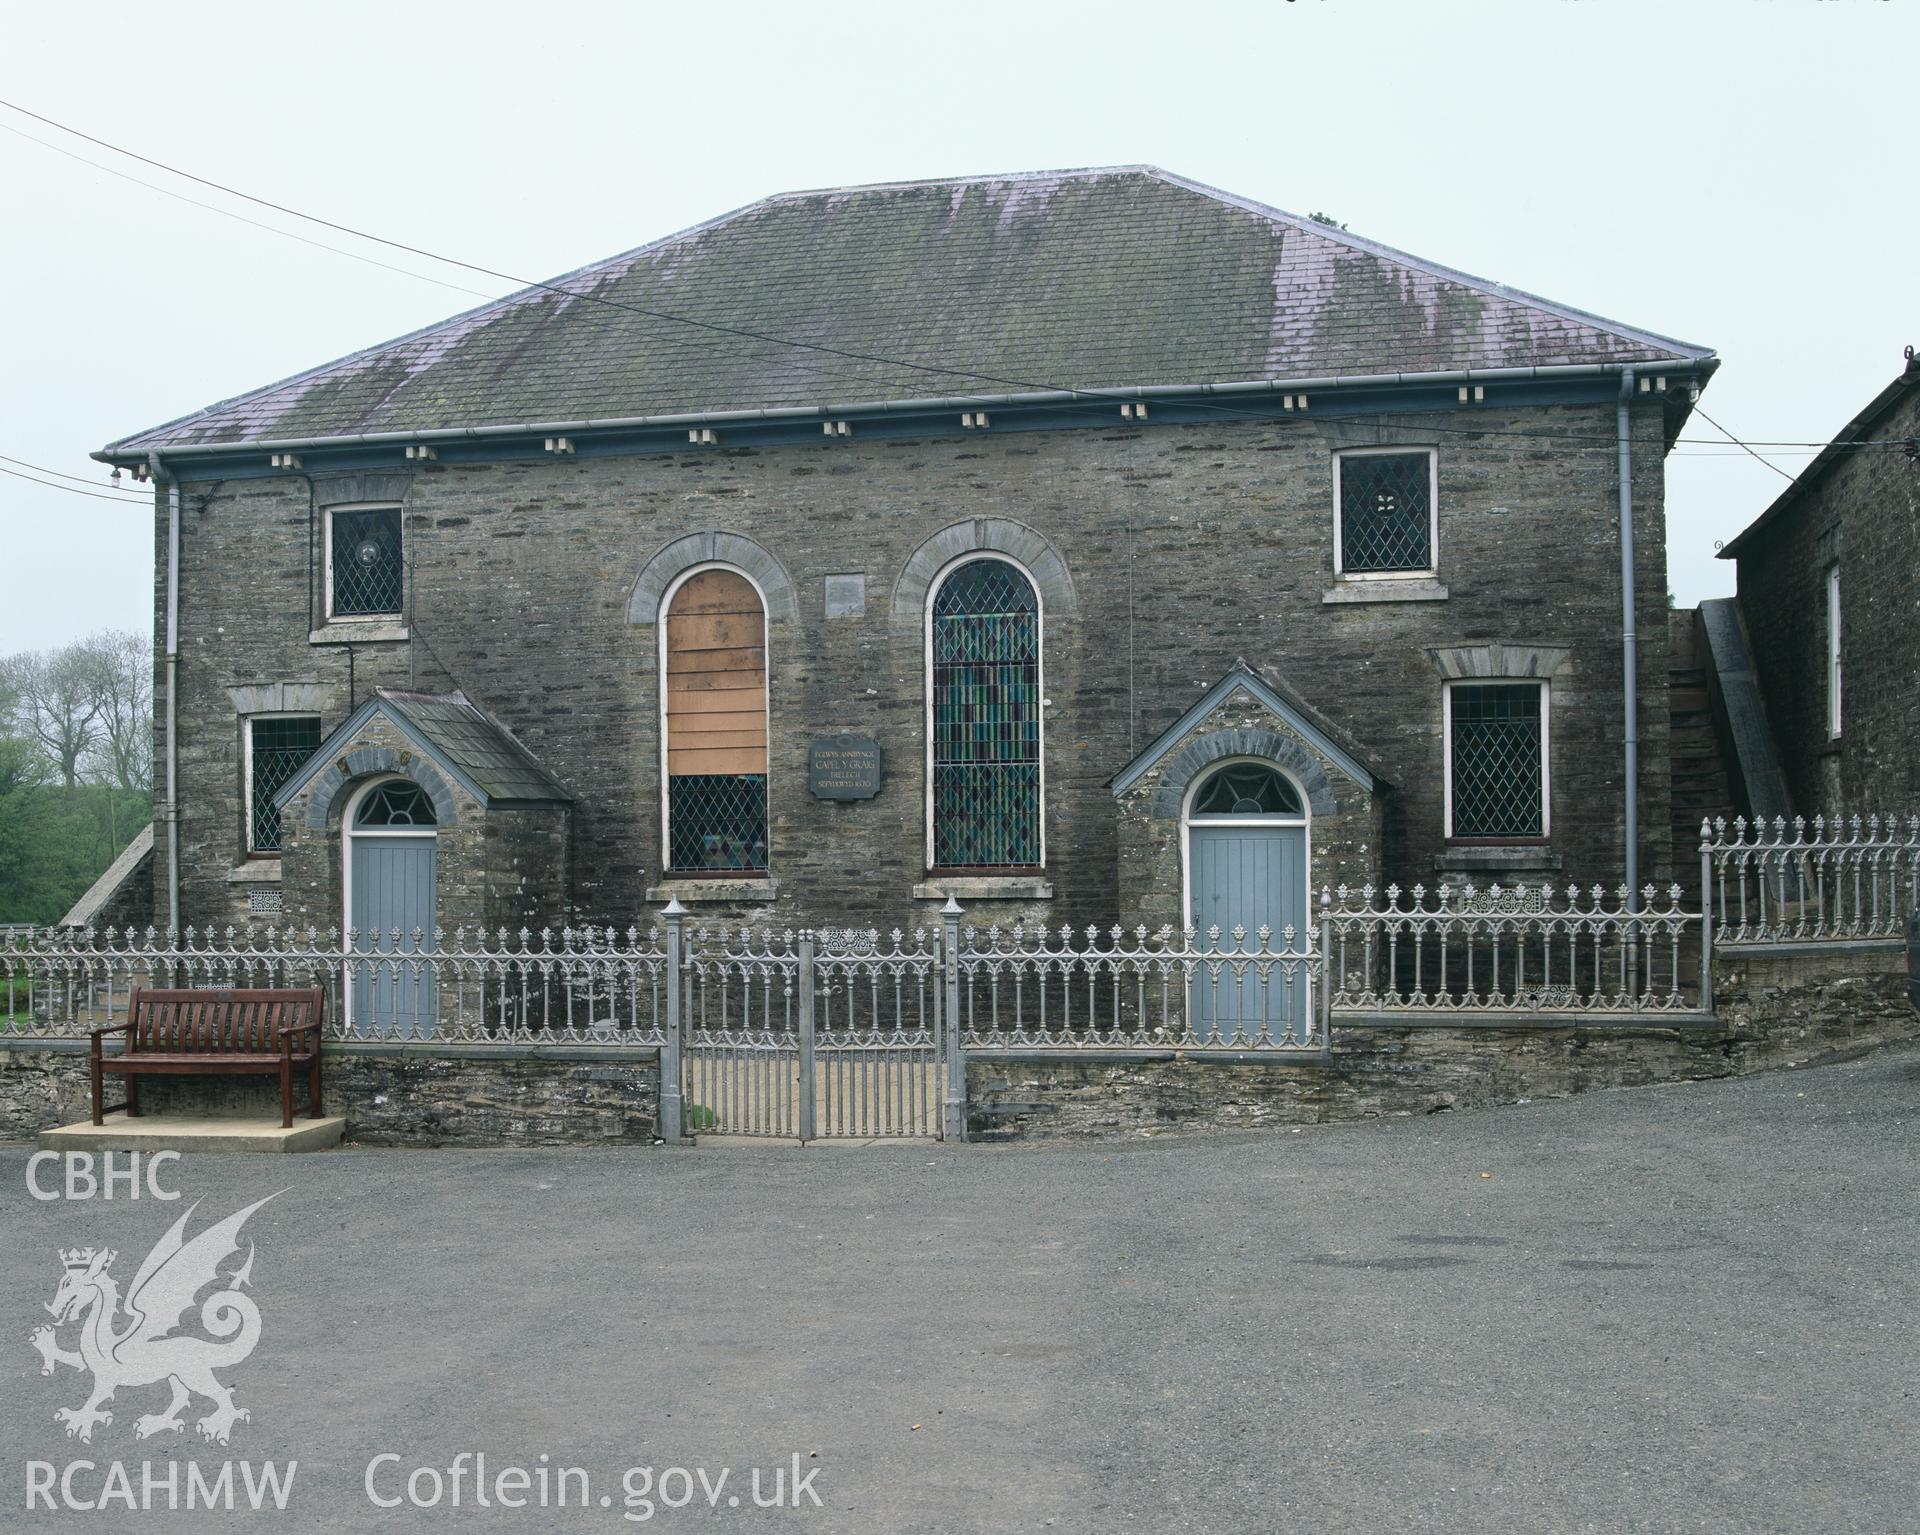 Colour transparency showing an exterior view of Capel y Graig, Rhydwenog, produced by Iain Wright, June 2004.